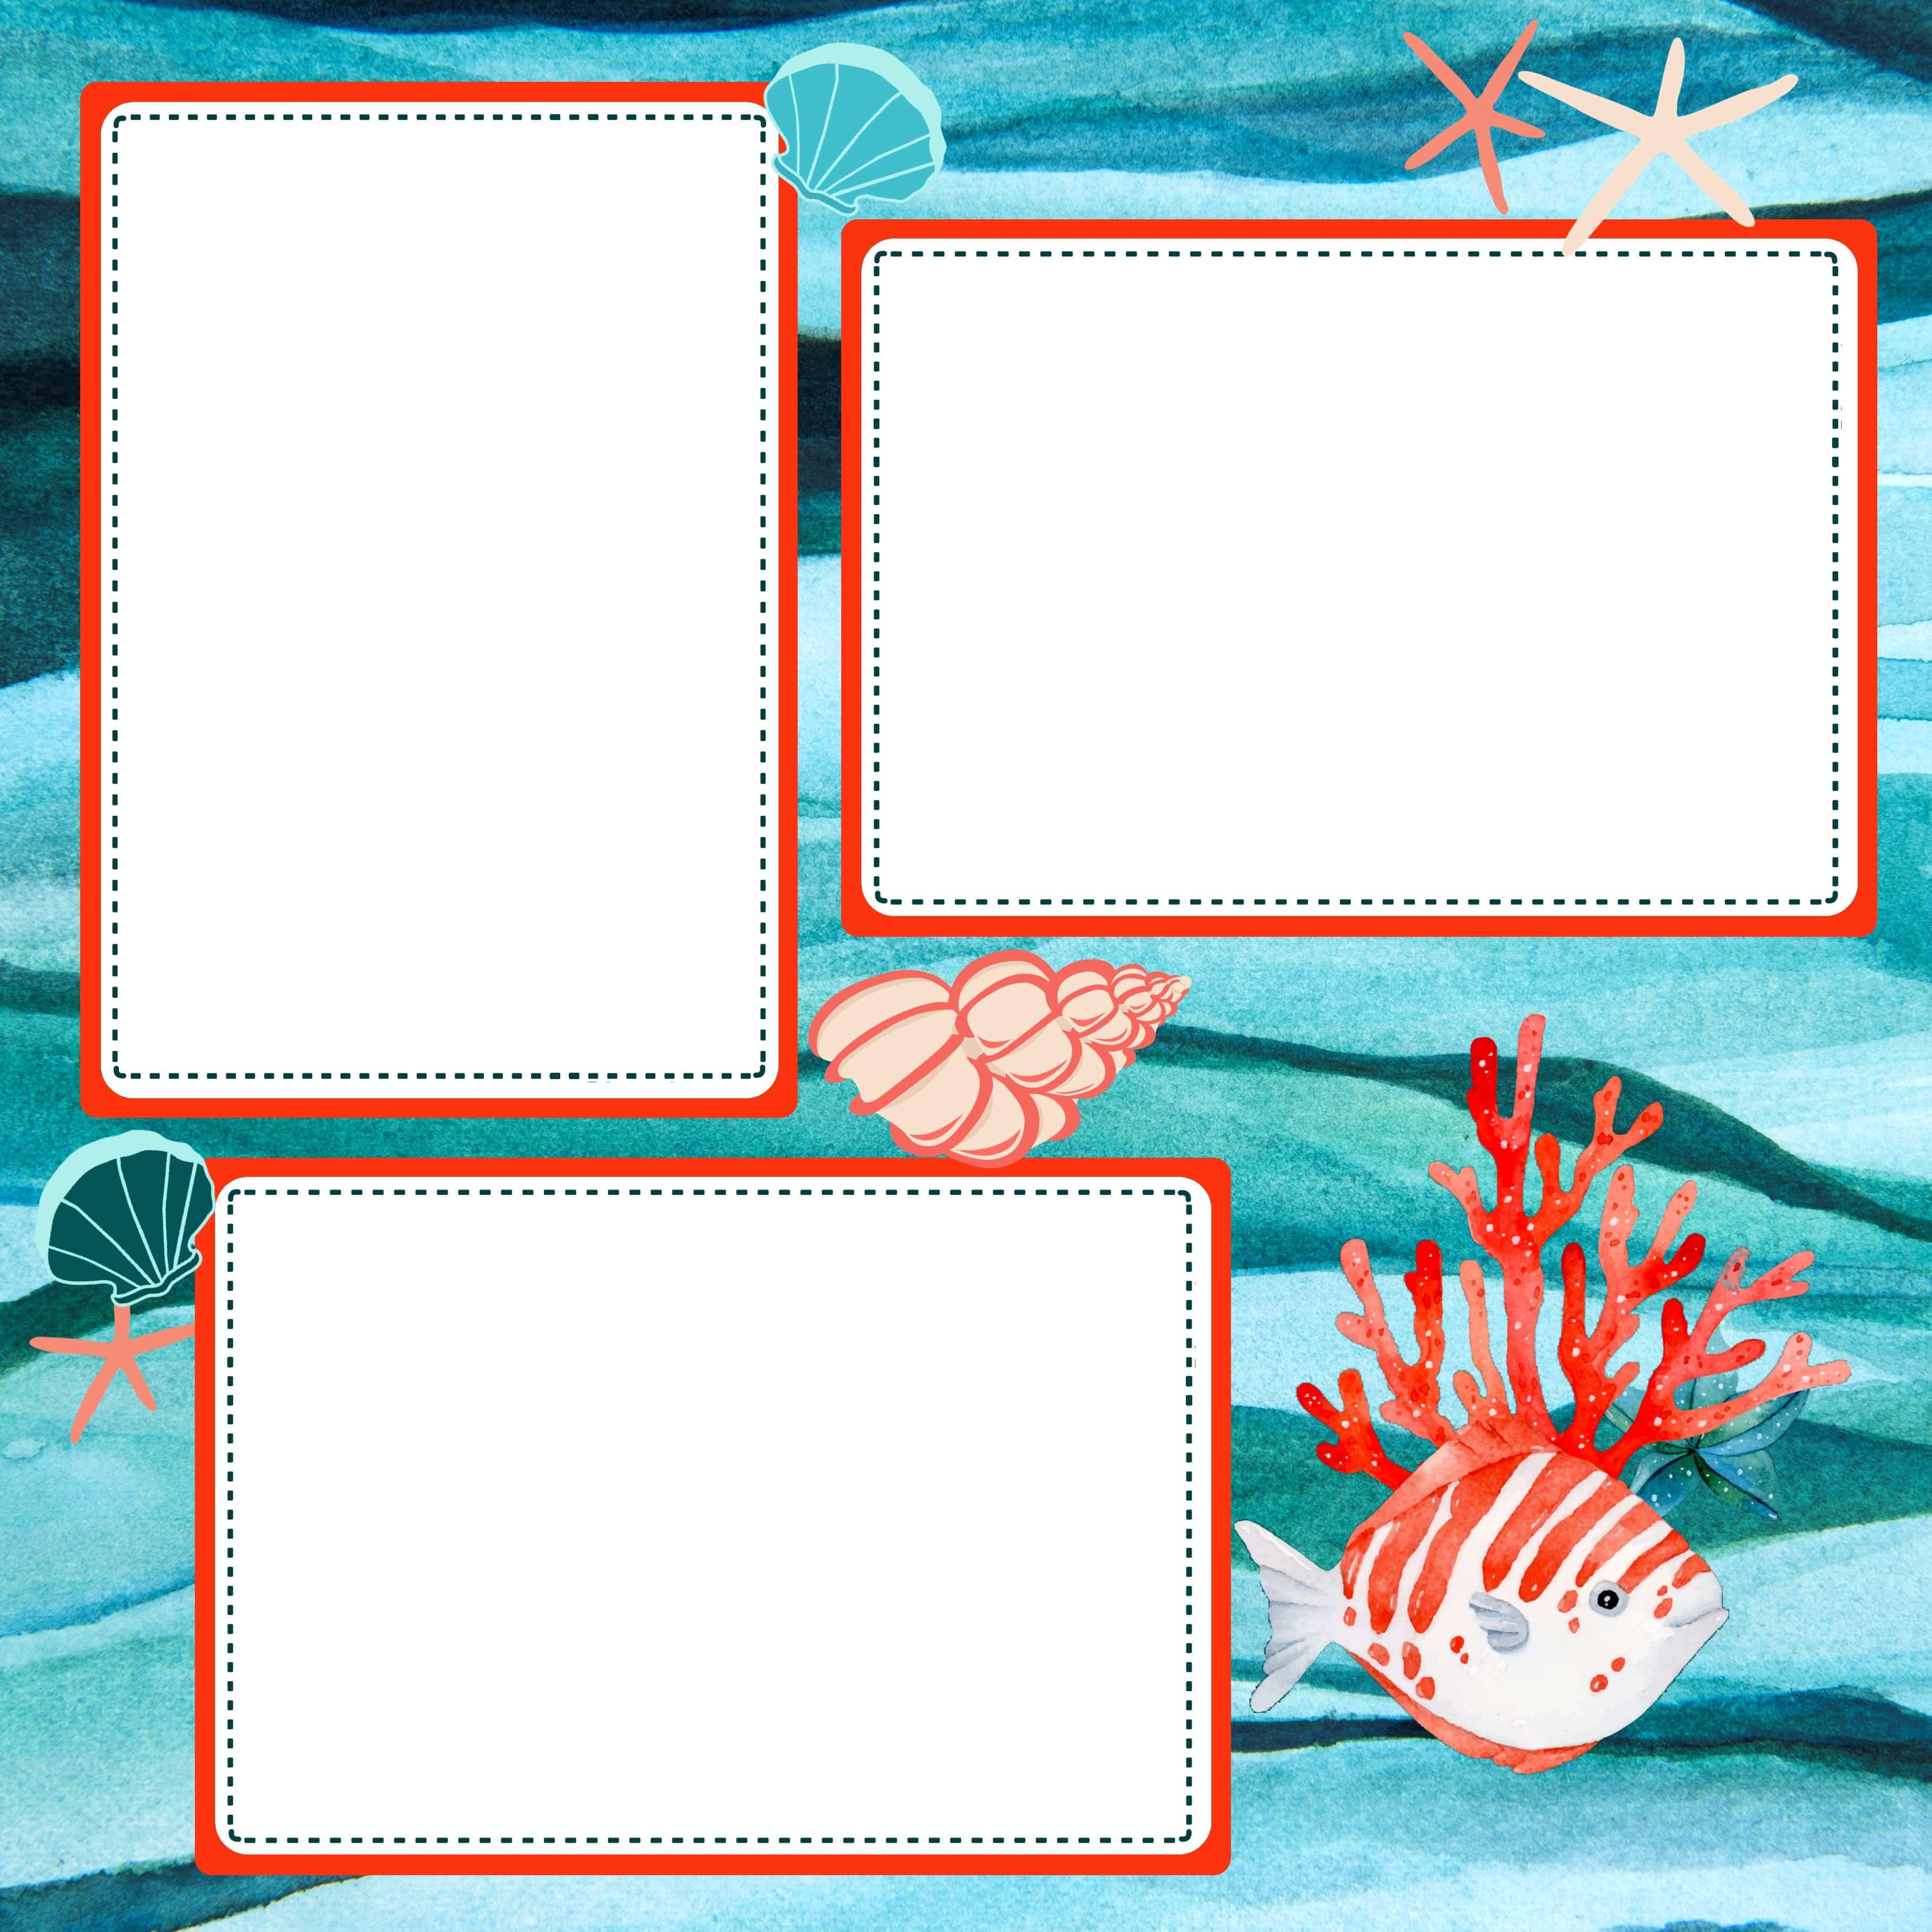 Under The Sea Tropical (2) - 12 x 12 Premade, Printed Scrapbook Pages by SSC Designs - Scrapbook Supply Companies